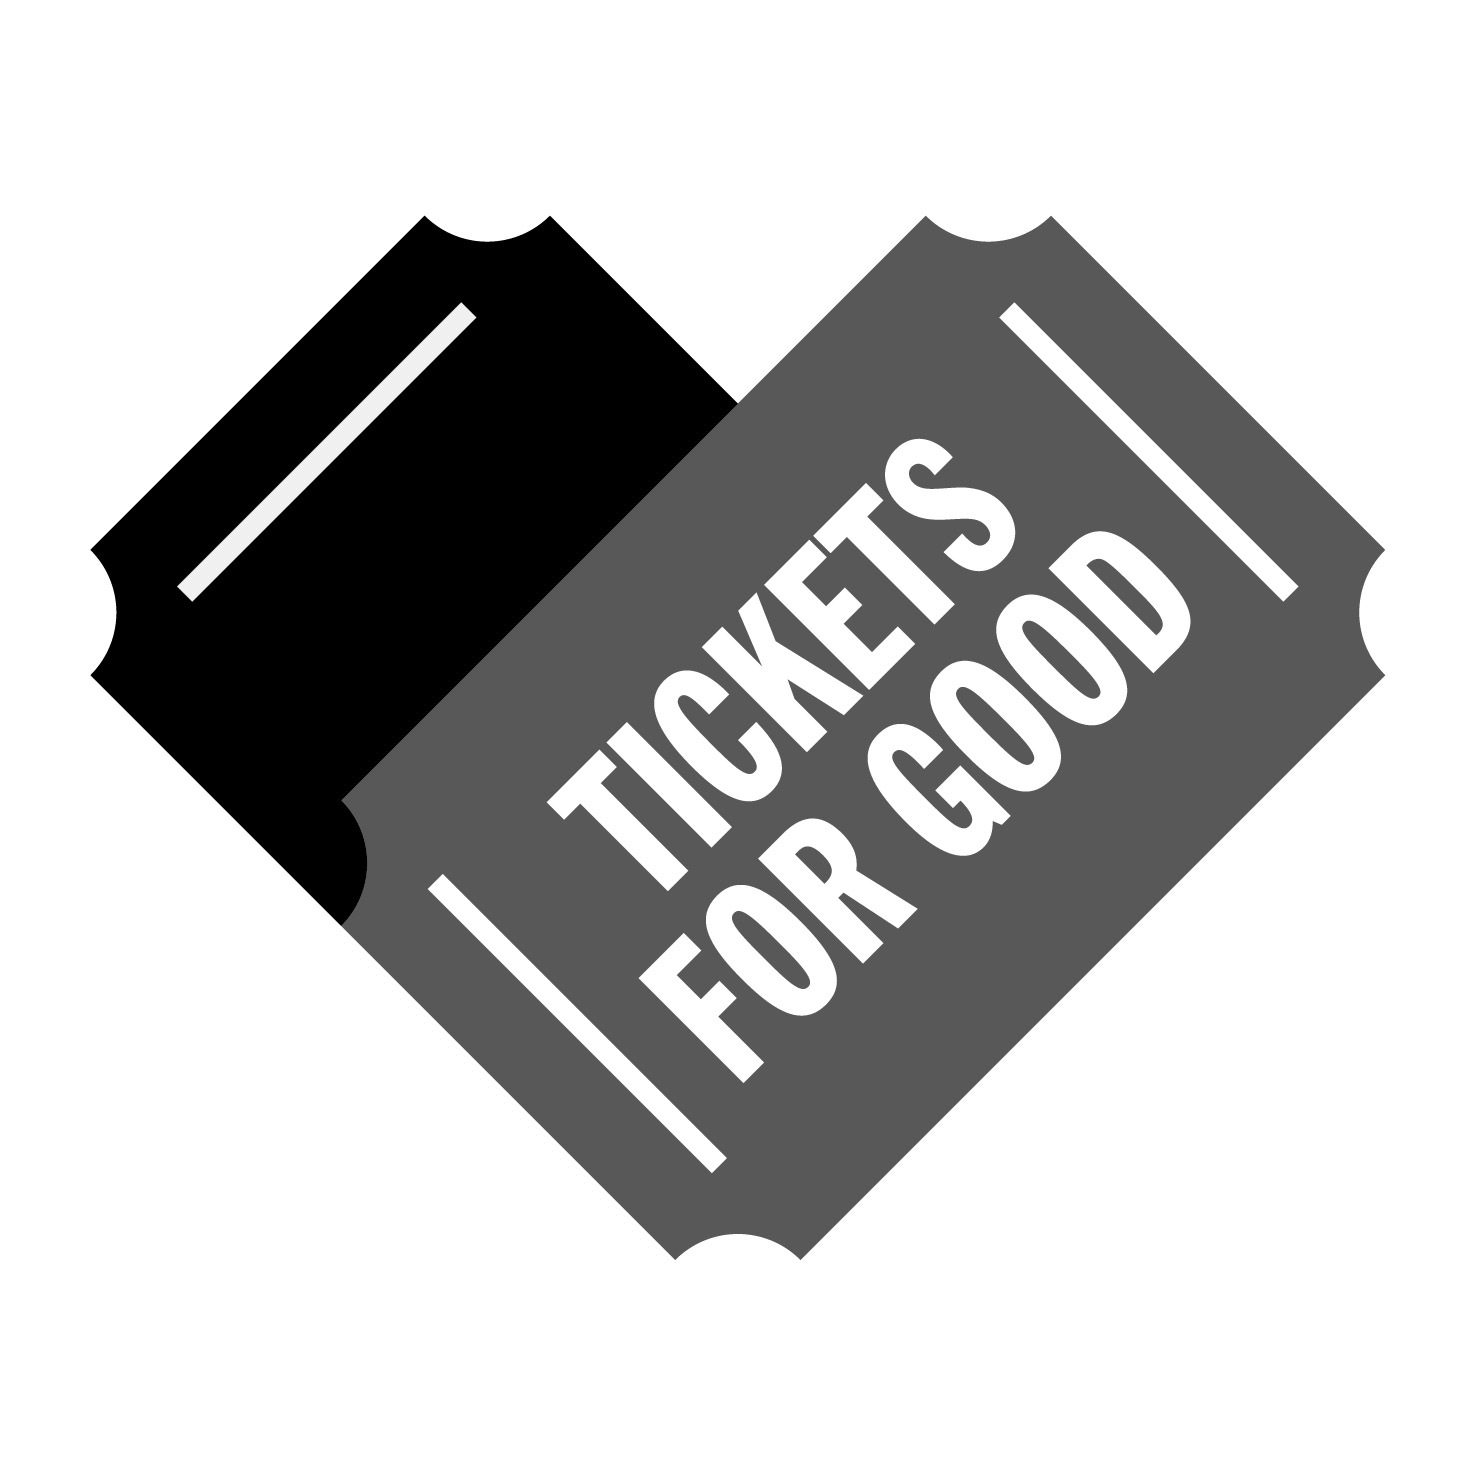 Tickets for Good